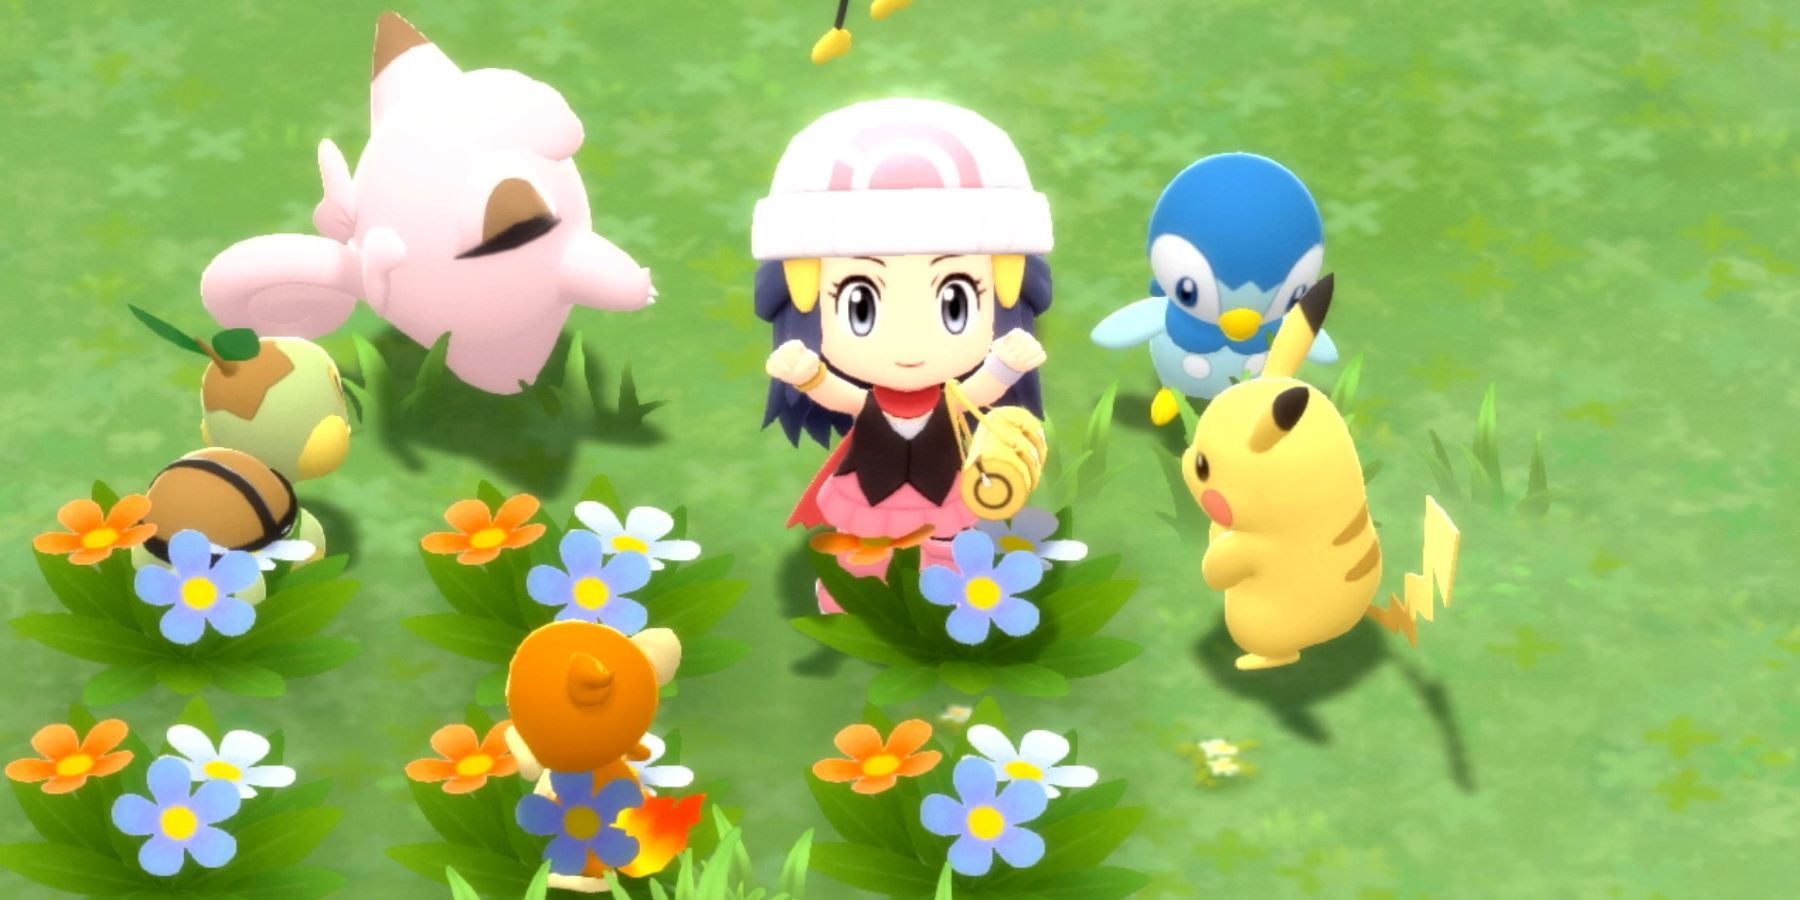 Dawn visiting Amity Square with Turtwig, Piplup, Clefairy, Pikachu, Chimchar, and Drifloon in Pokemon Brilliant Diamond and Shining Pearl